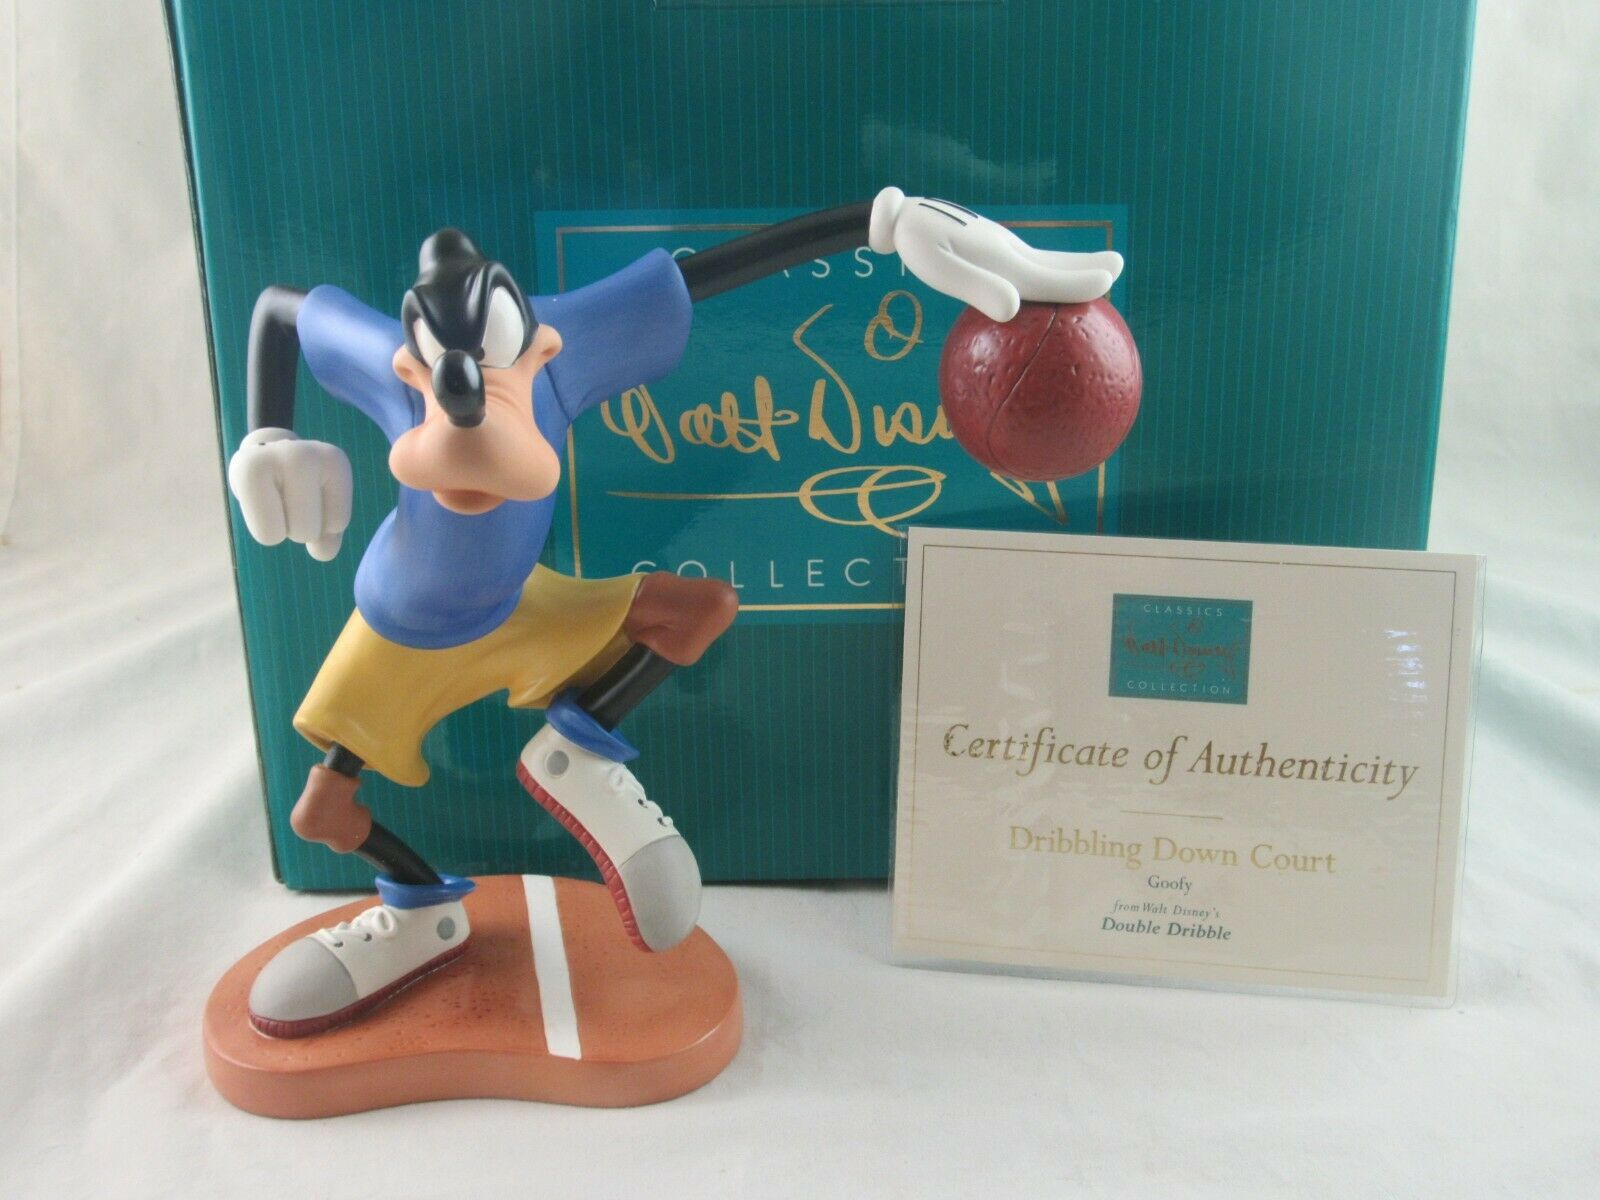 Wdcc "double Dribble" Goofy From Disney's Dribbling Down Court In Box With Coa